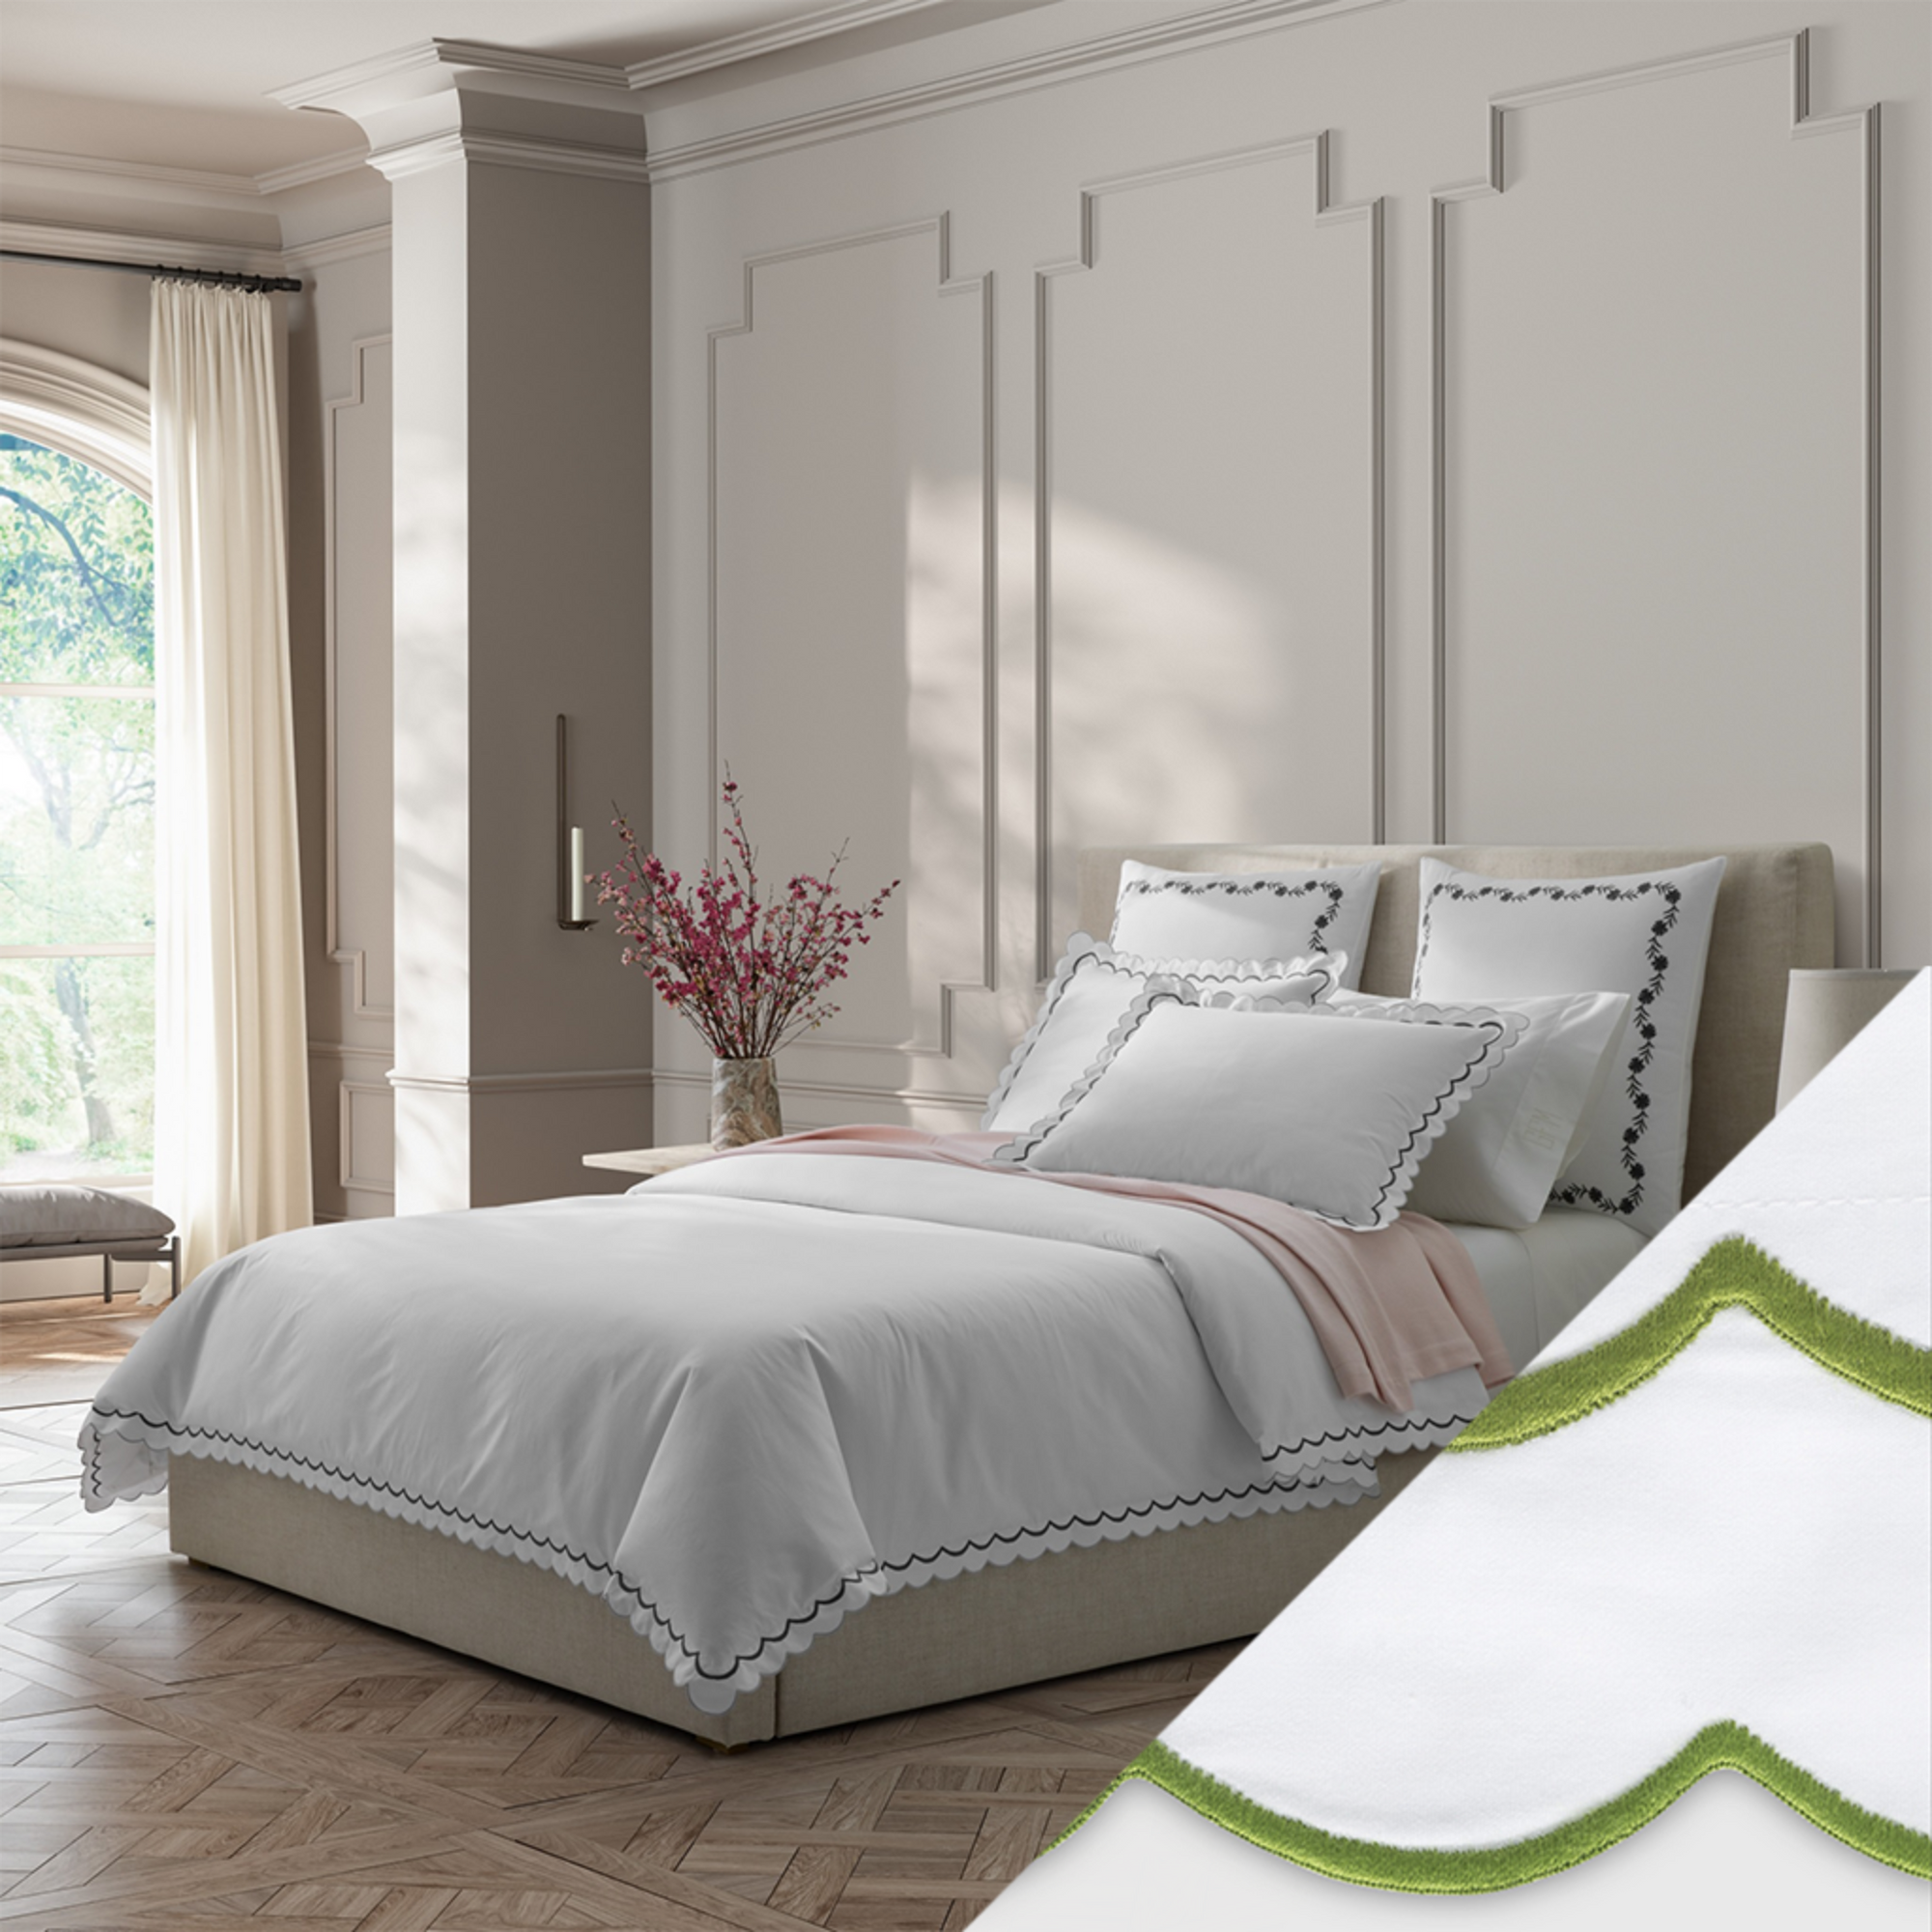 Full Bed Dressed in Matouk India Bedding in Charcoal Color with Grass Swatch